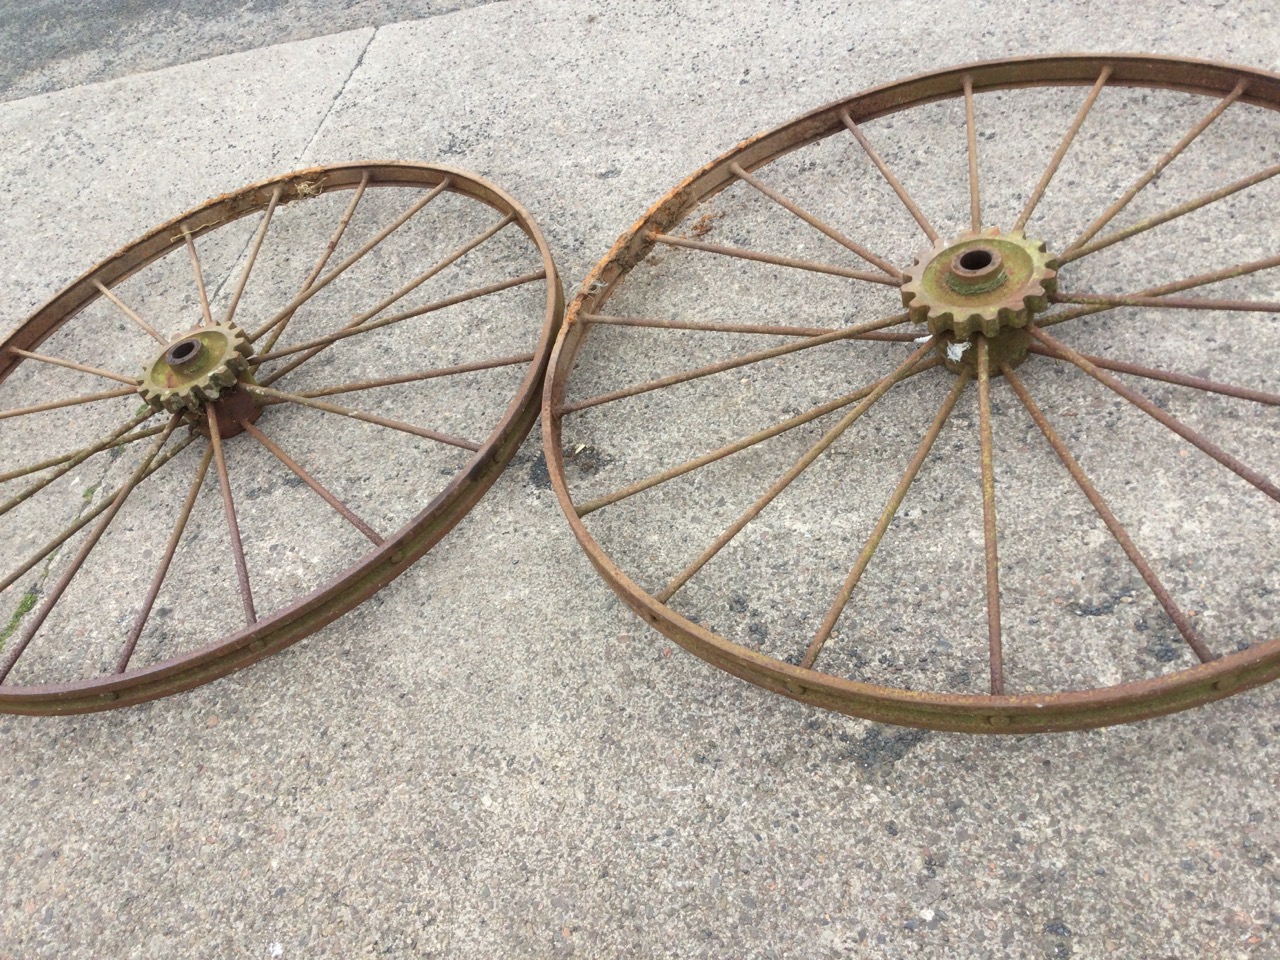 A pair of large agricultural wheels with channelled flat rims framing two sets of spokes with - Image 3 of 3